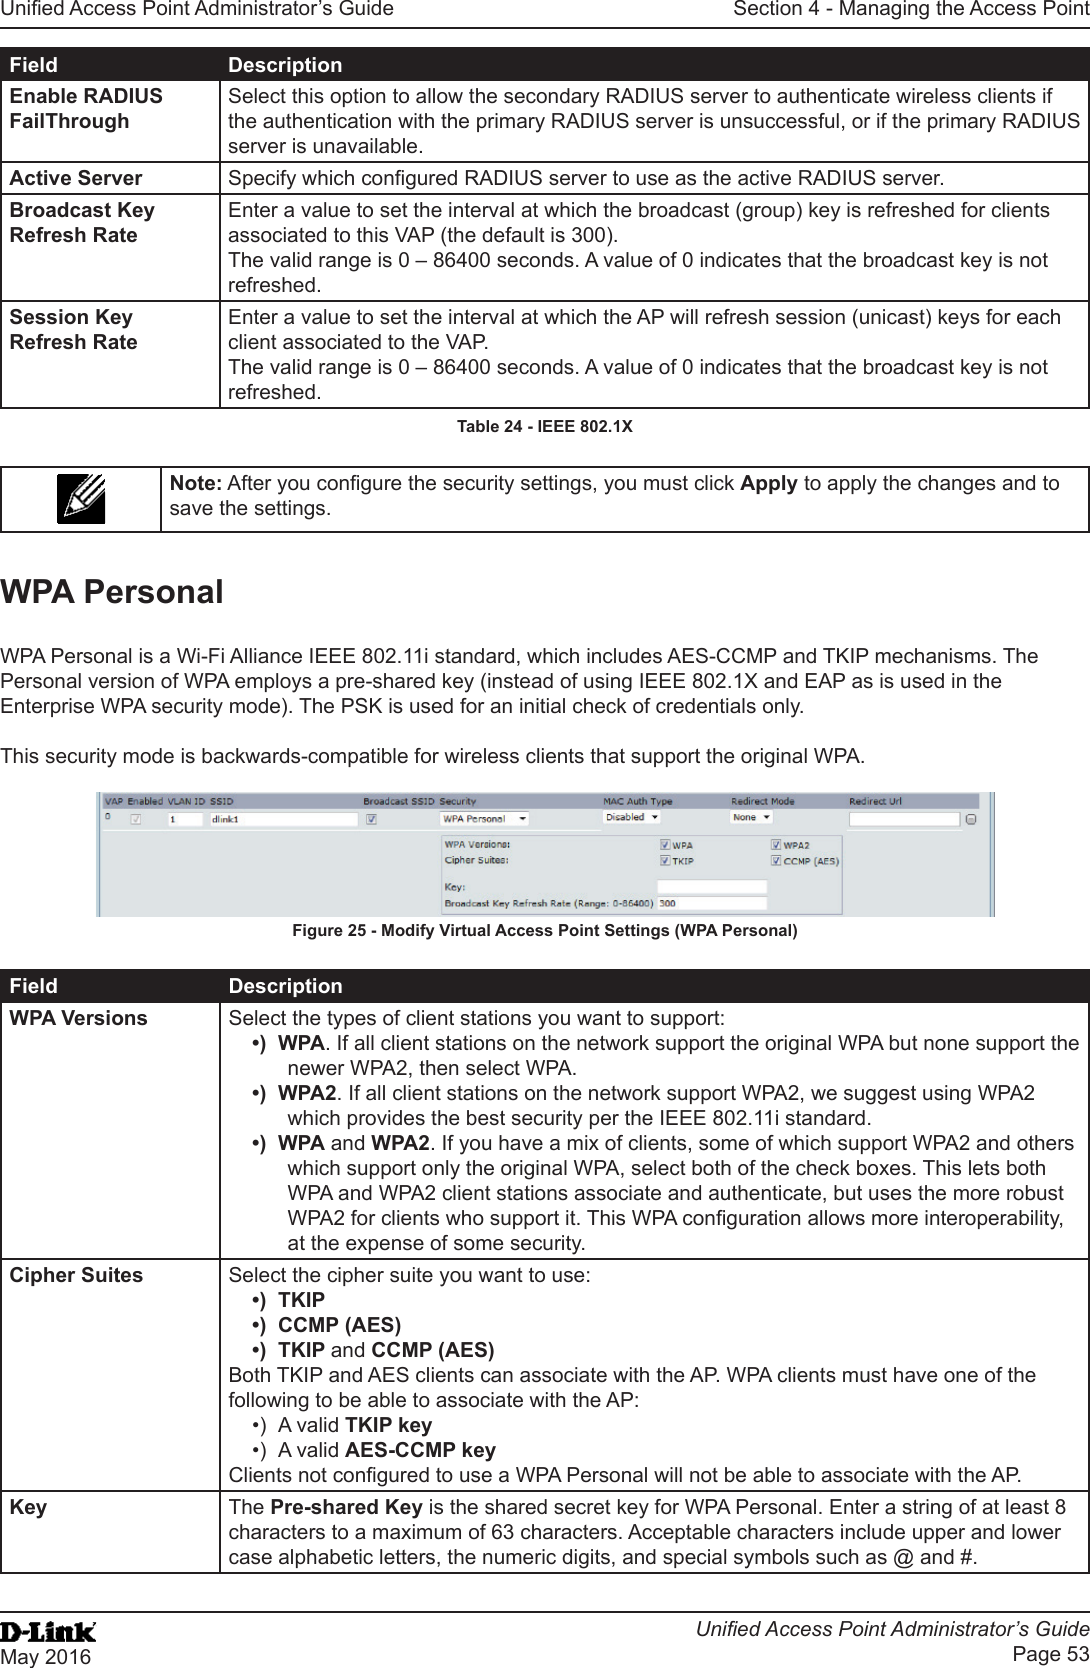 Unied Access Point Administrator’s GuideUnied Access Point Administrator’s GuidePage 53May 2016Section 4 - Managing the Access PointField DescriptionEnable RADIUS FailThroughSelect this option to allow the secondary RADIUS server to authenticate wireless clients if the authentication with the primary RADIUS server is unsuccessful, or if the primary RADIUS server is unavailable.Active Server Specify which congured RADIUS server to use as the active RADIUS server.Broadcast Key Refresh RateEnter a value to set the interval at which the broadcast (group) key is refreshed for clients associated to this VAP (the default is 300). The valid range is 0 – 86400 seconds. A value of 0 indicates that the broadcast key is not refreshed.Session Key Refresh RateEnter a value to set the interval at which the AP will refresh session (unicast) keys for each client associated to the VAP. The valid range is 0 – 86400 seconds. A value of 0 indicates that the broadcast key is not refreshed.Table 24 - IEEE 802.1XNote: After you congure the security settings, you must click Apply to apply the changes and to save the settings. WPA PersonalWPA Personal is a Wi-Fi Alliance IEEE 802.11i standard, which includes AES-CCMP and TKIP mechanisms. The Personal version of WPA employs a pre-shared key (instead of using IEEE 802.1X and EAP as is used in the Enterprise WPA security mode). The PSK is used for an initial check of credentials only.This security mode is backwards-compatible for wireless clients that support the original WPA.Figure 25 - Modify Virtual Access Point Settings (WPA Personal)Field DescriptionWPA Versions Select the types of client stations you want to support:•)  WPA. If all client stations on the network support the original WPA but none support the newer WPA2, then select WPA.•)  WPA2. If all client stations on the network support WPA2, we suggest using WPA2 which provides the best security per the IEEE 802.11i standard.•)  WPA and WPA2. If you have a mix of clients, some of which support WPA2 and others which support only the original WPA, select both of the check boxes. This lets both WPA and WPA2 client stations associate and authenticate, but uses the more robust WPA2 for clients who support it. This WPA conguration allows more interoperability, at the expense of some security.Cipher Suites Select the cipher suite you want to use:•)  TKIP•)  CCMP (AES)•)  TKIP and CCMP (AES)Both TKIP and AES clients can associate with the AP. WPA clients must have one of the following to be able to associate with the AP:•)  A valid TKIP key•)  A valid AES-CCMP keyClients not congured to use a WPA Personal will not be able to associate with the AP.Key The Pre-shared Key is the shared secret key for WPA Personal. Enter a string of at least 8 characters to a maximum of 63 characters. Acceptable characters include upper and lower case alphabetic letters, the numeric digits, and special symbols such as @ and #.